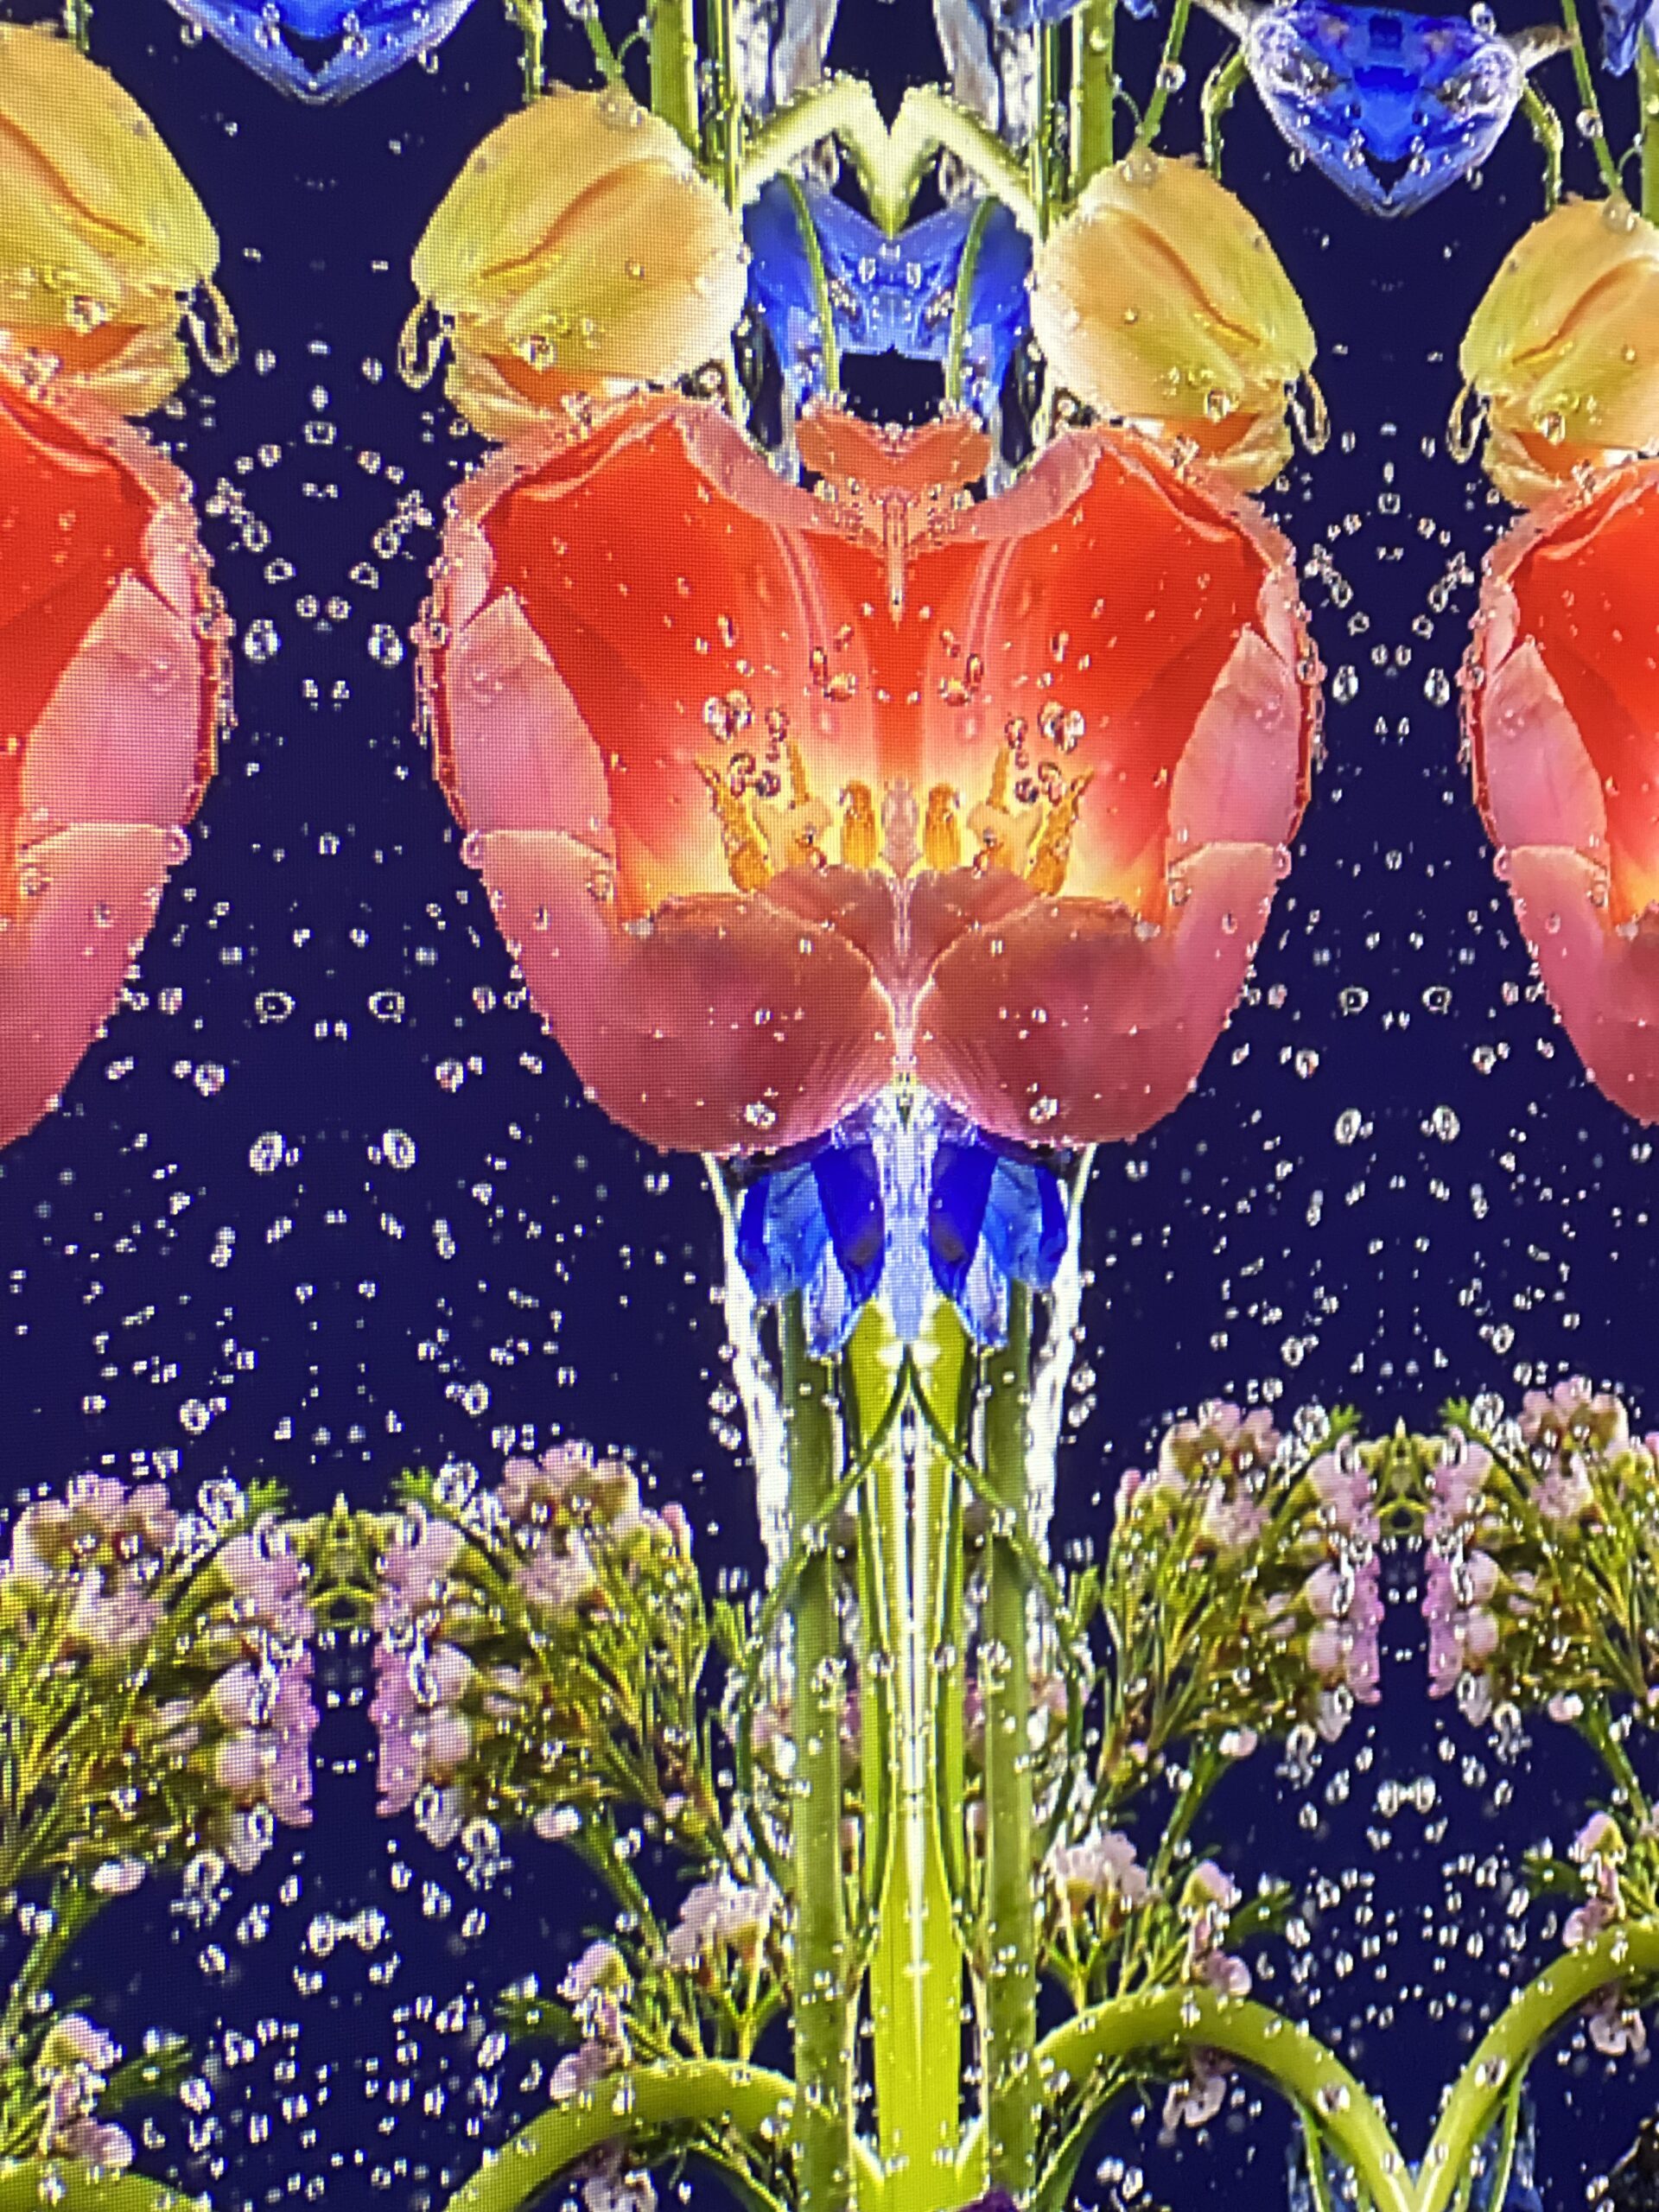 an floral image from a multimedia display at the Philadelphia Flower Show